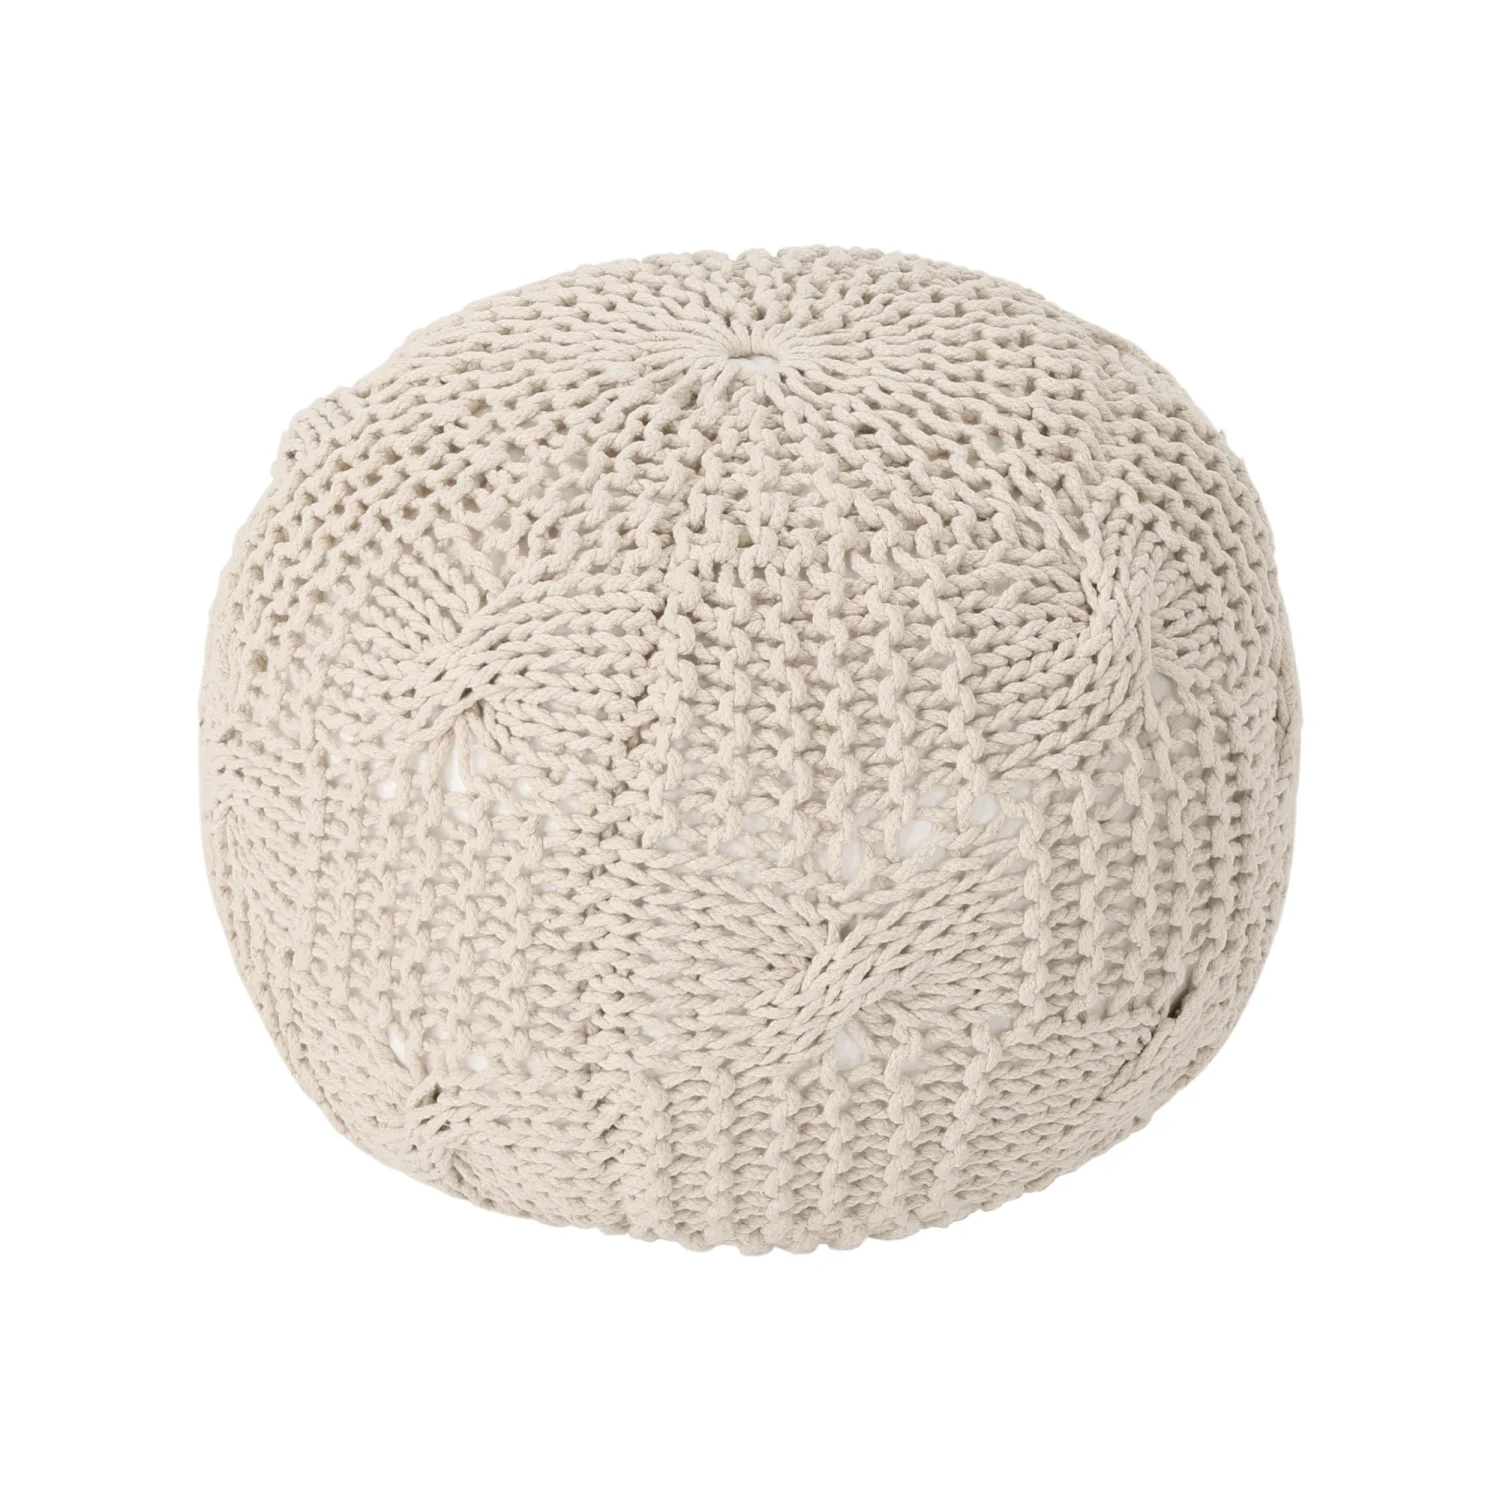 

Cozy Bordeaux Round Knitted Cotton Pouf in Elegant Beige Color for Stylish Home Decor and Comfortable Seating